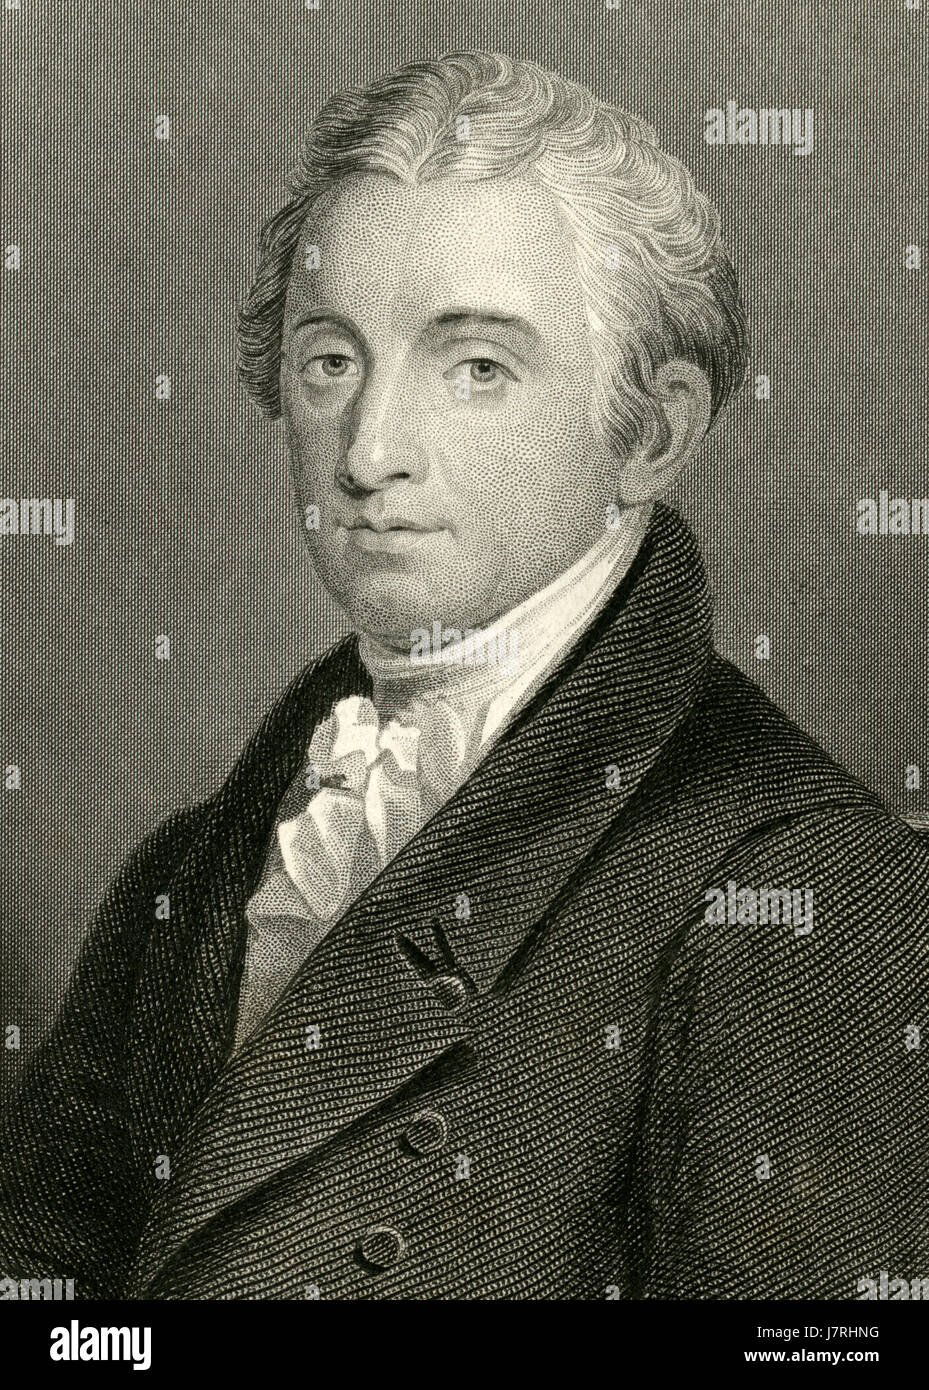 Antique c1860 engraving, James Monroe. James Monroe (1758-1831) was an American statesman who served from 1817 to 1825 as the fifth President of the United States. Monroe was the last president among the Founding Fathers of the United States as well as the Virginian dynasty. SOURCE: ORIGINAL ENGRAVING. Stock Photo